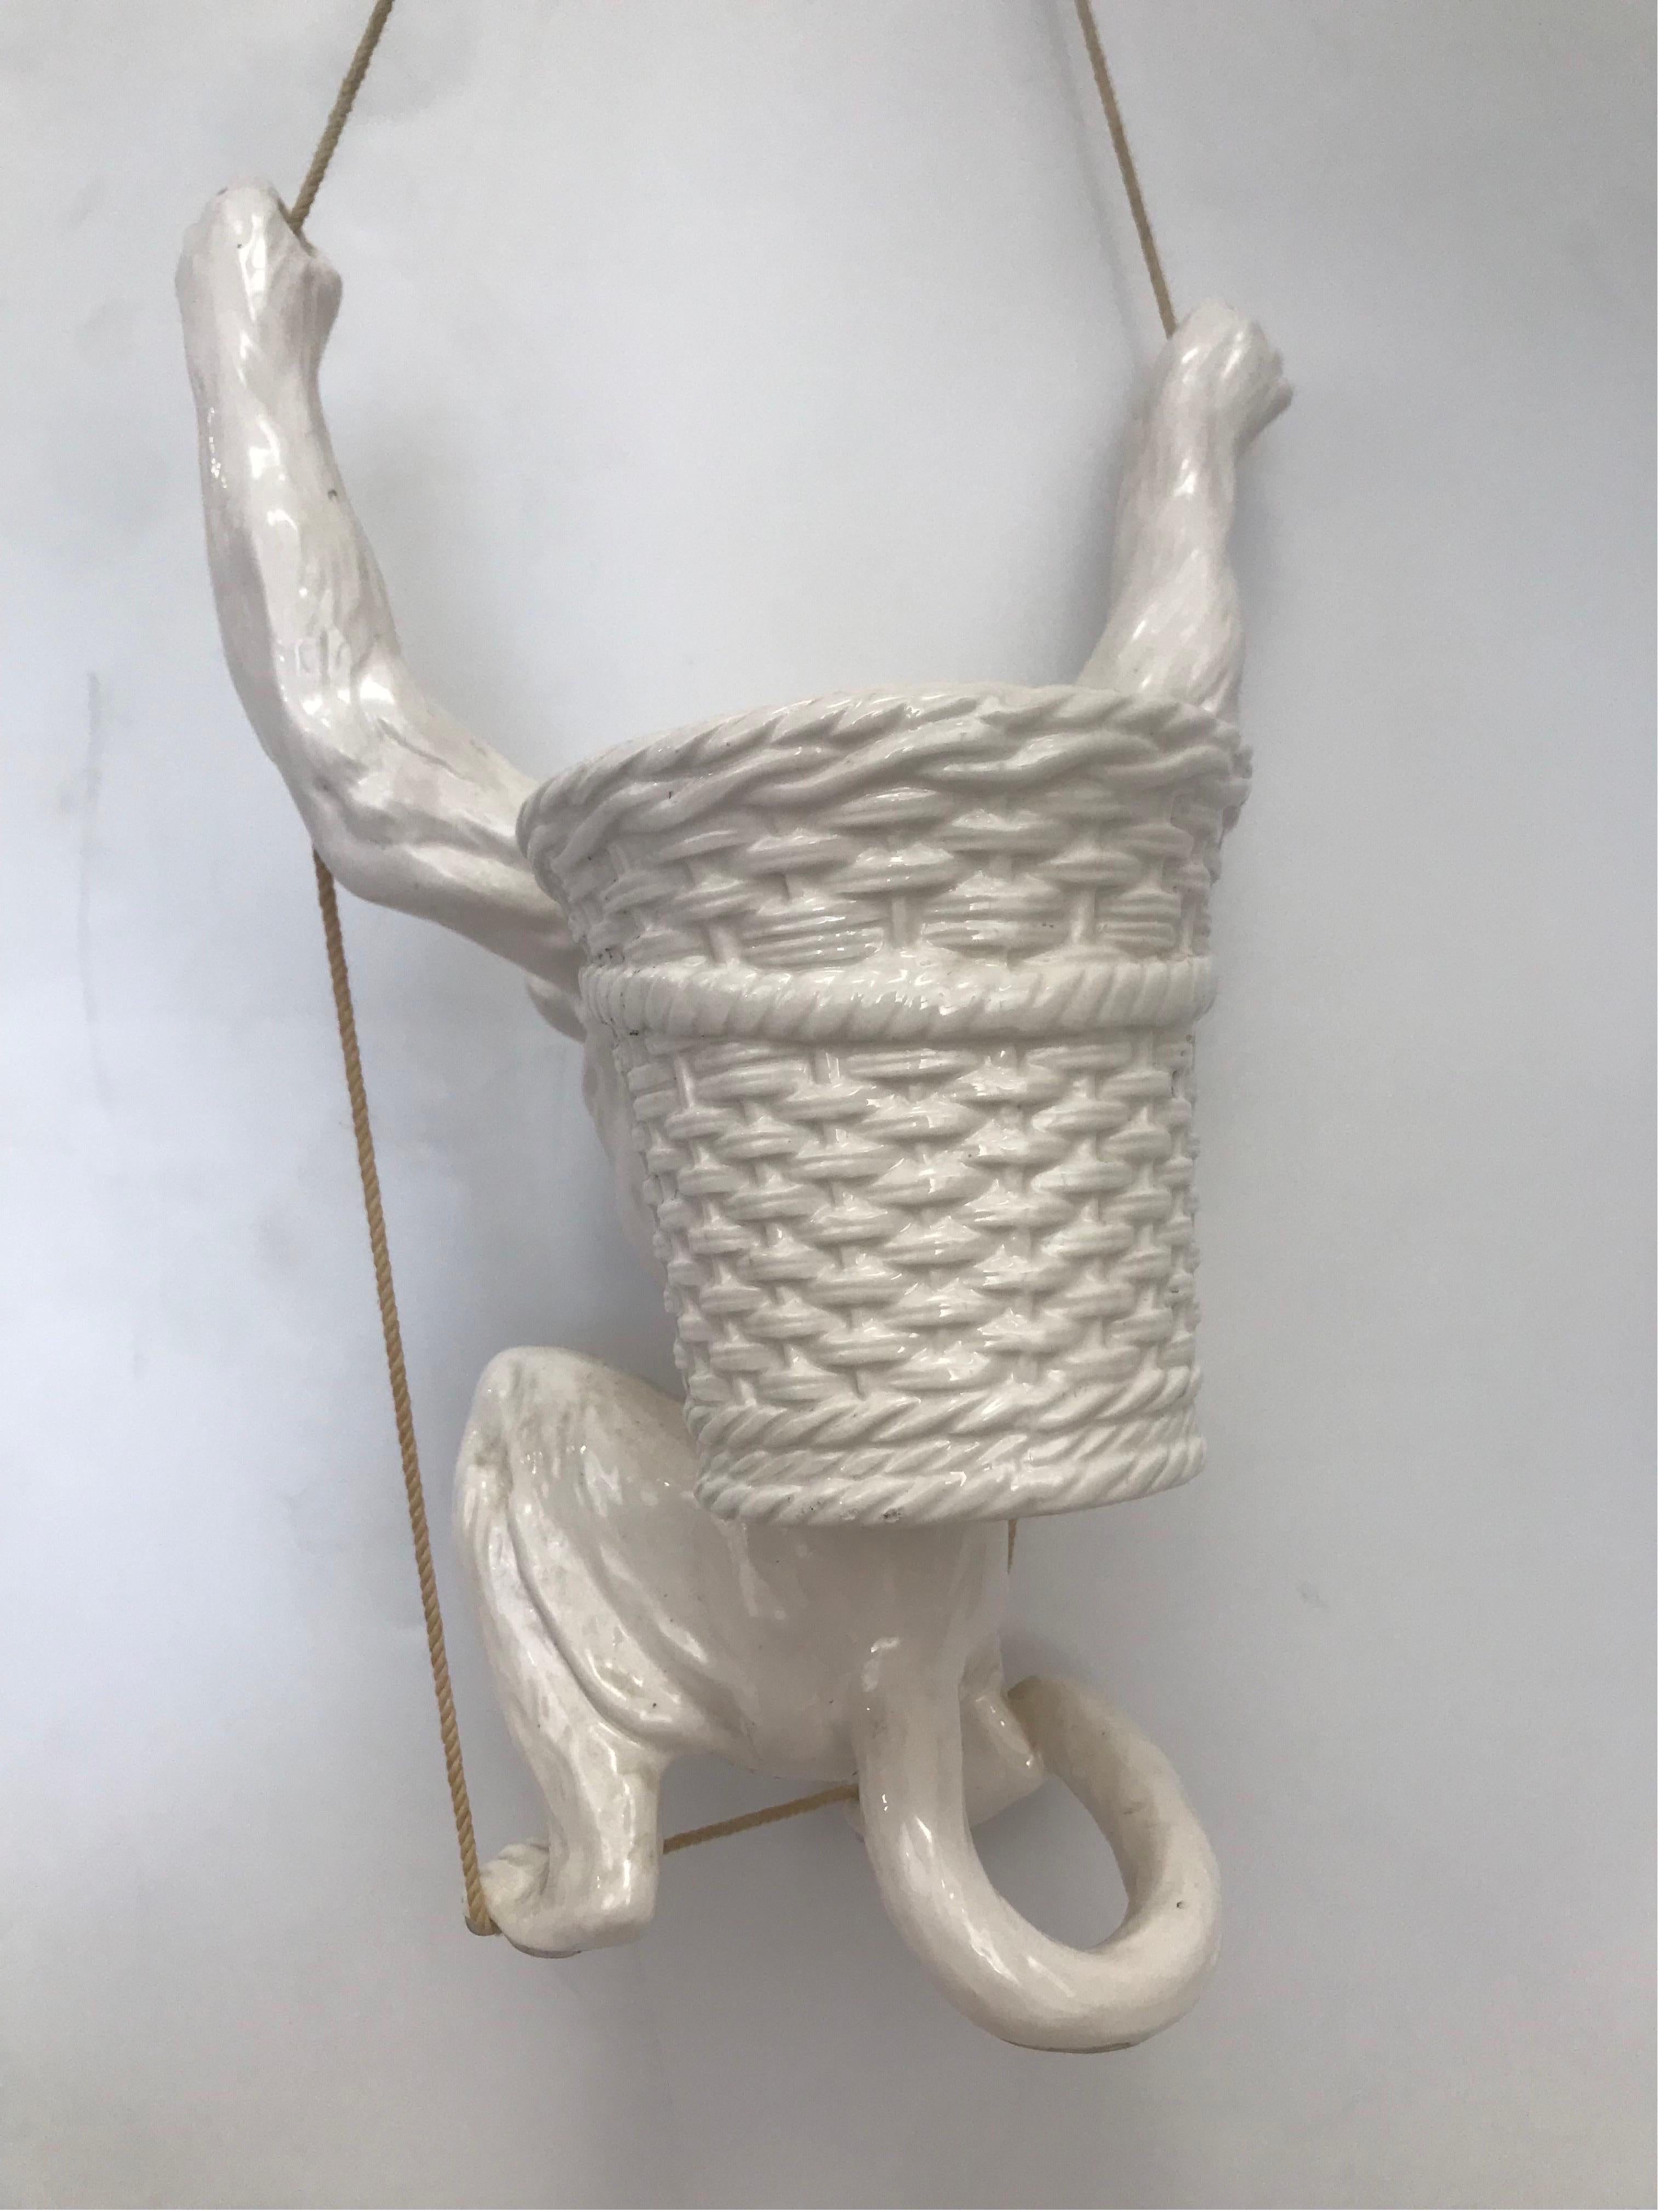 Cast Hanging Ceramic Monkey Planter by Fits and Floyd, 1976 For Sale